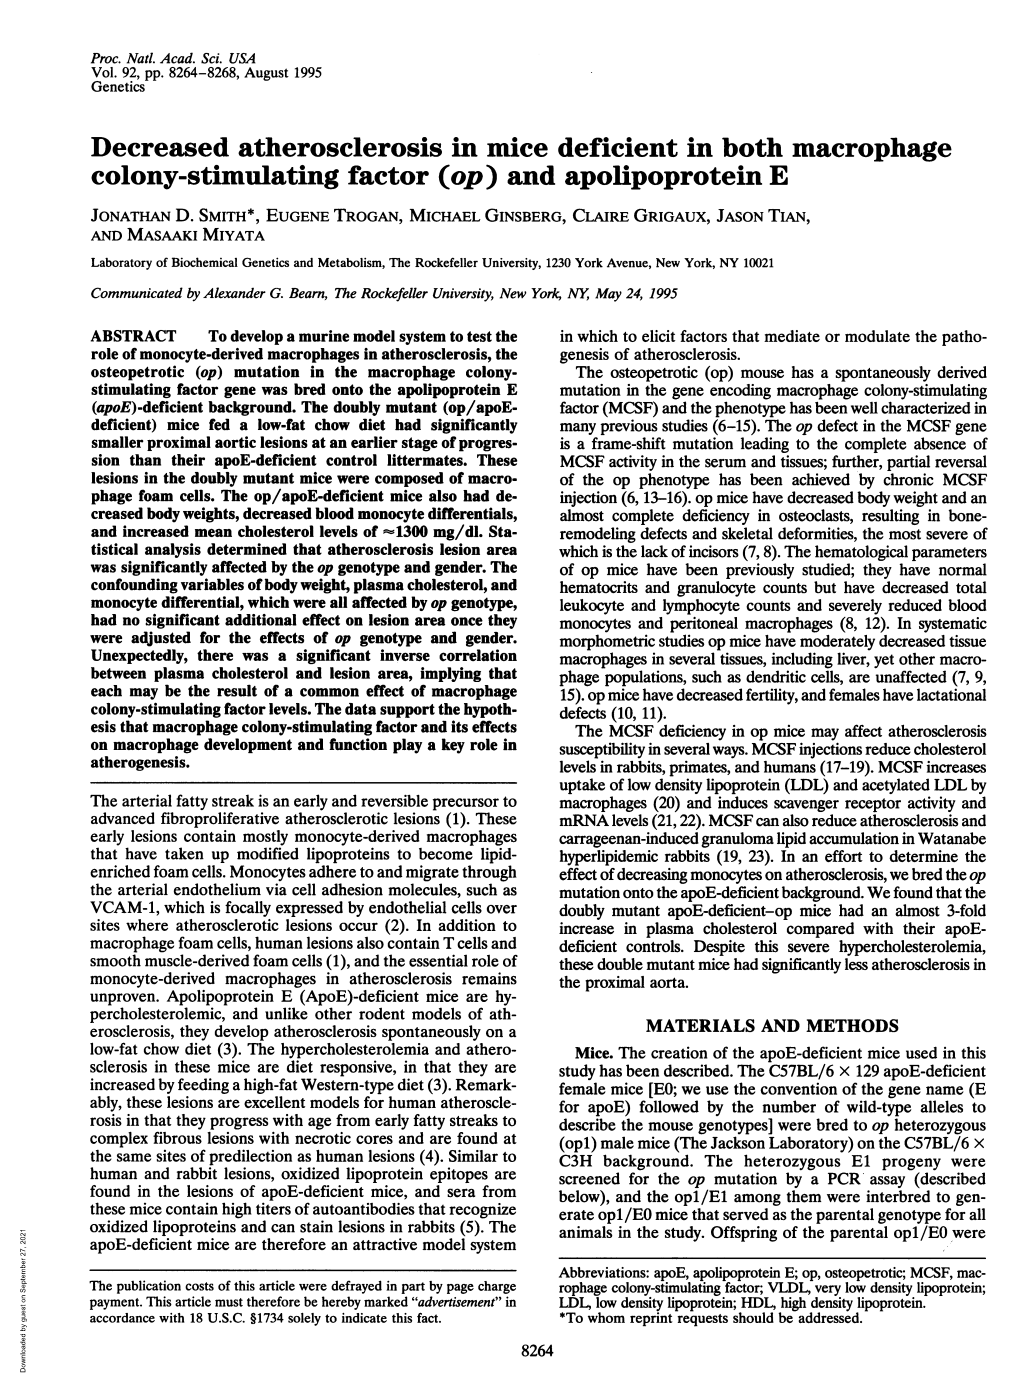 Colony-Stimulating Factor (Op) and Apolipoprotein E JONATHAN D